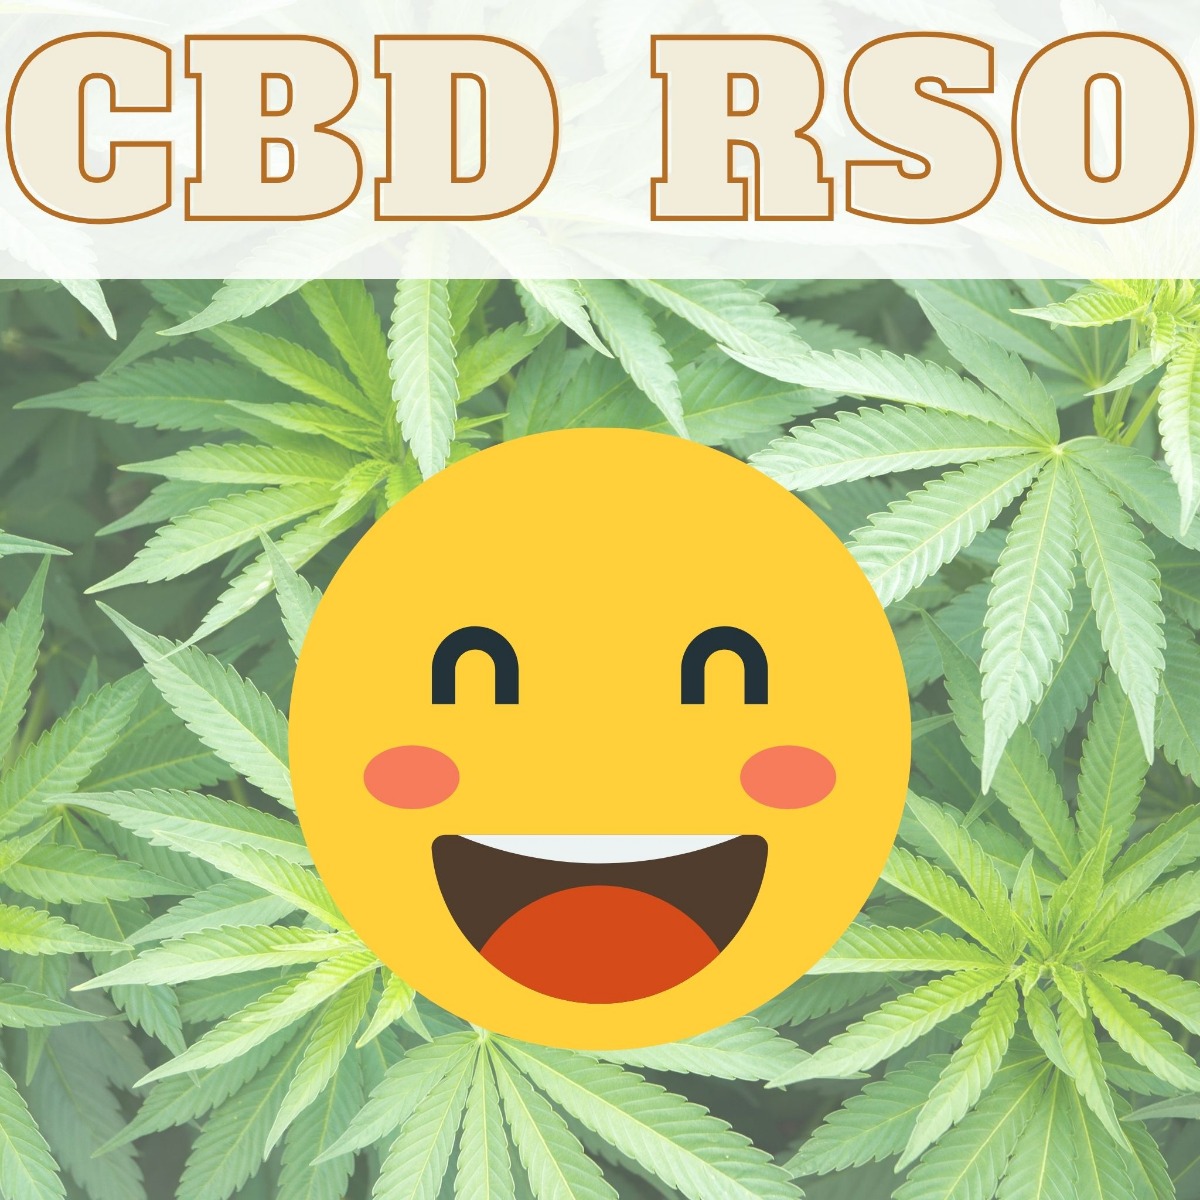 CBD RSO title with a cbd plant and smiley face in the background 